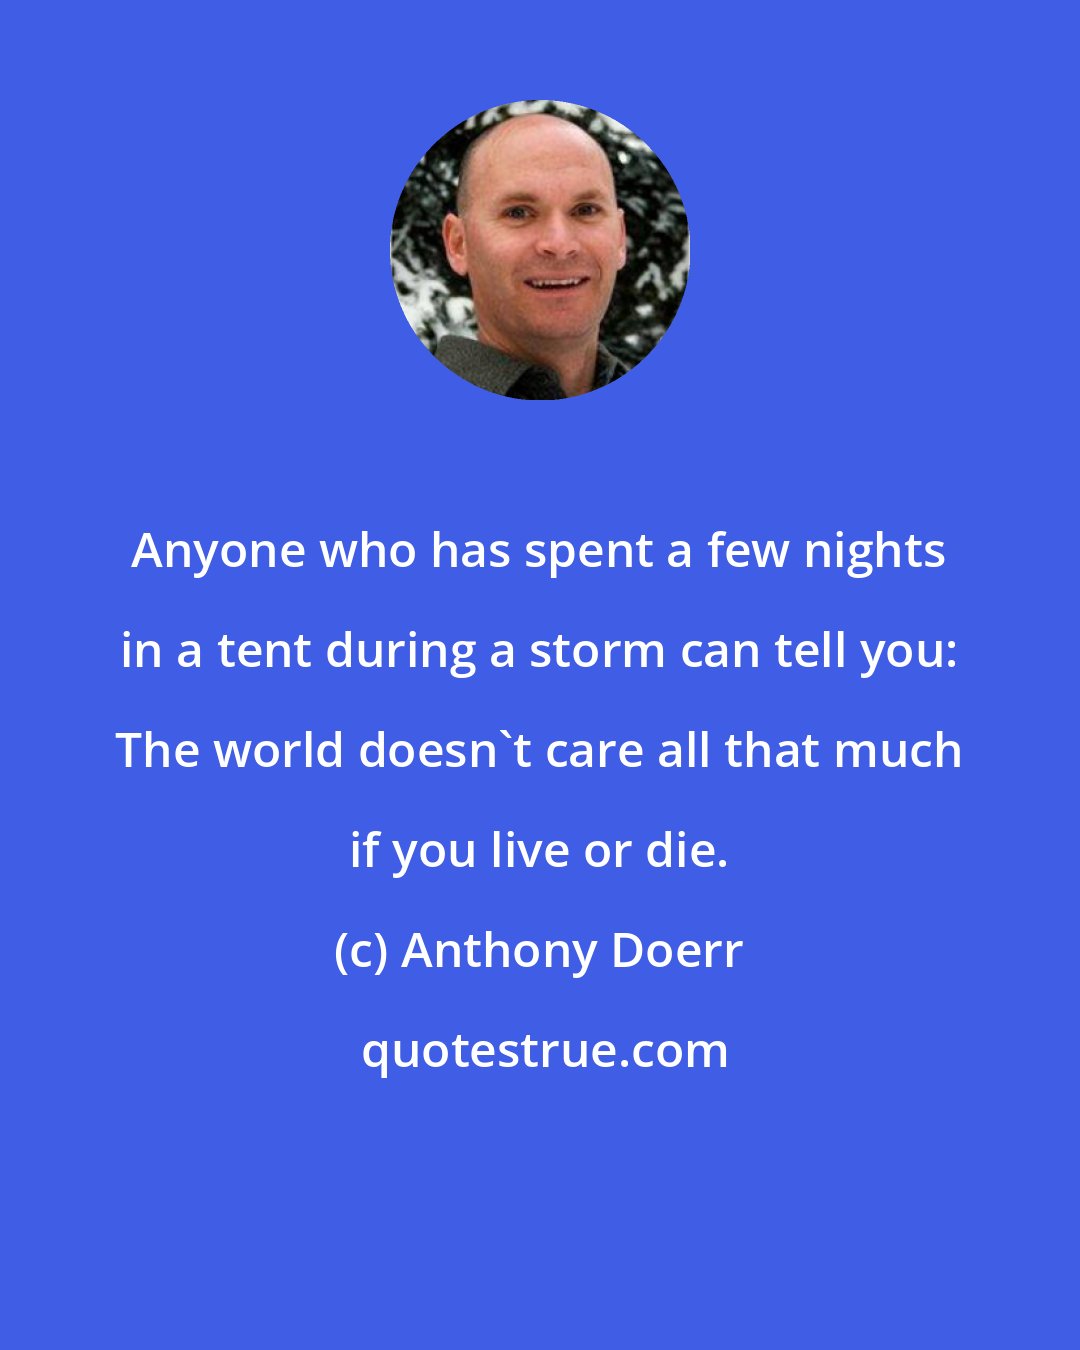 Anthony Doerr: Anyone who has spent a few nights in a tent during a storm can tell you: The world doesn't care all that much if you live or die.